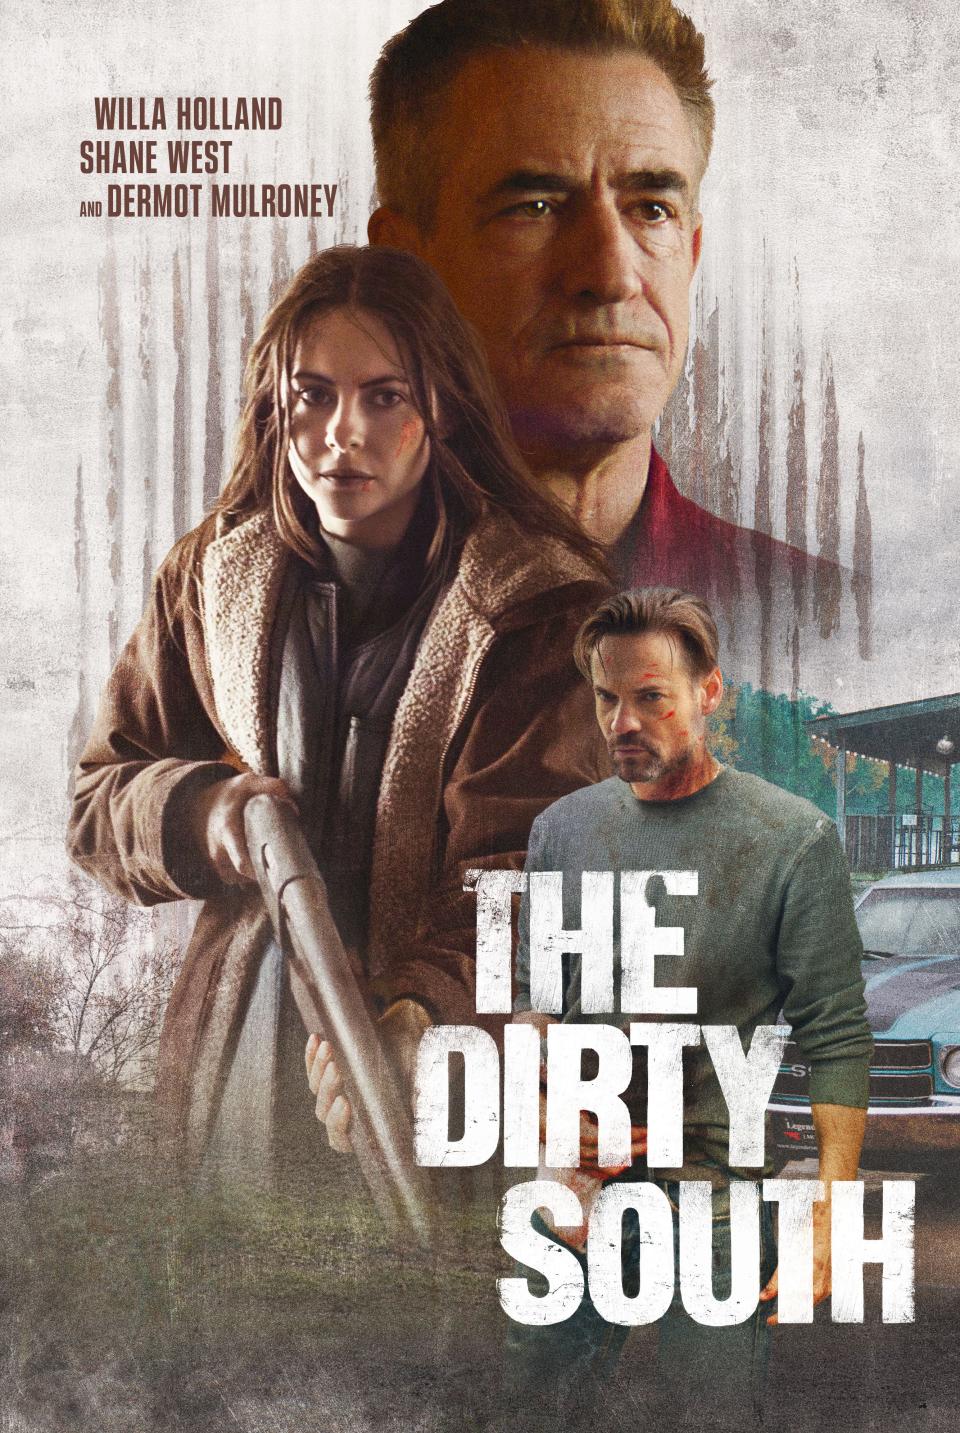 Shane West Talks Working With Dermot Mulroney in 'The Dirty South'